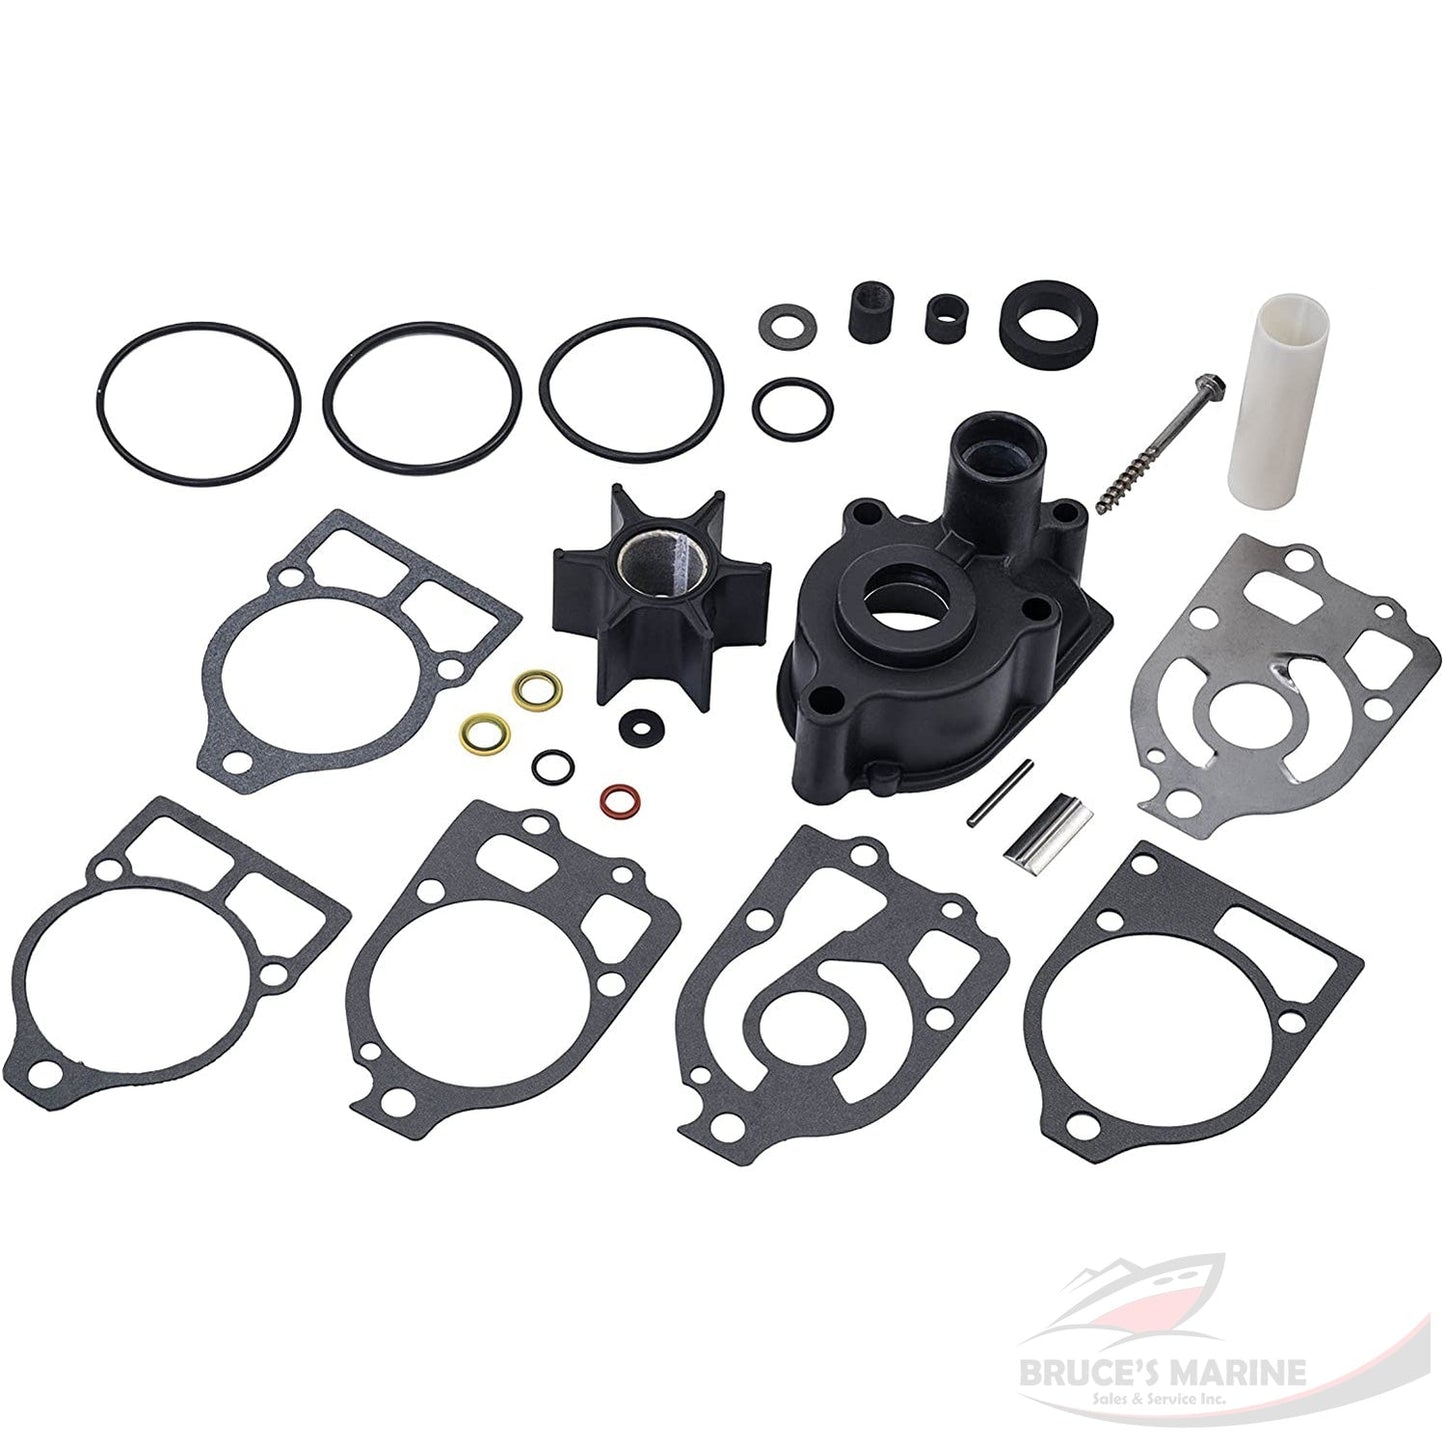 Quicksilver 46-96148Q 8 - Water Pump Kit, No Base - Mercury and Mariner Outboards and MerCruiser Stern Drives